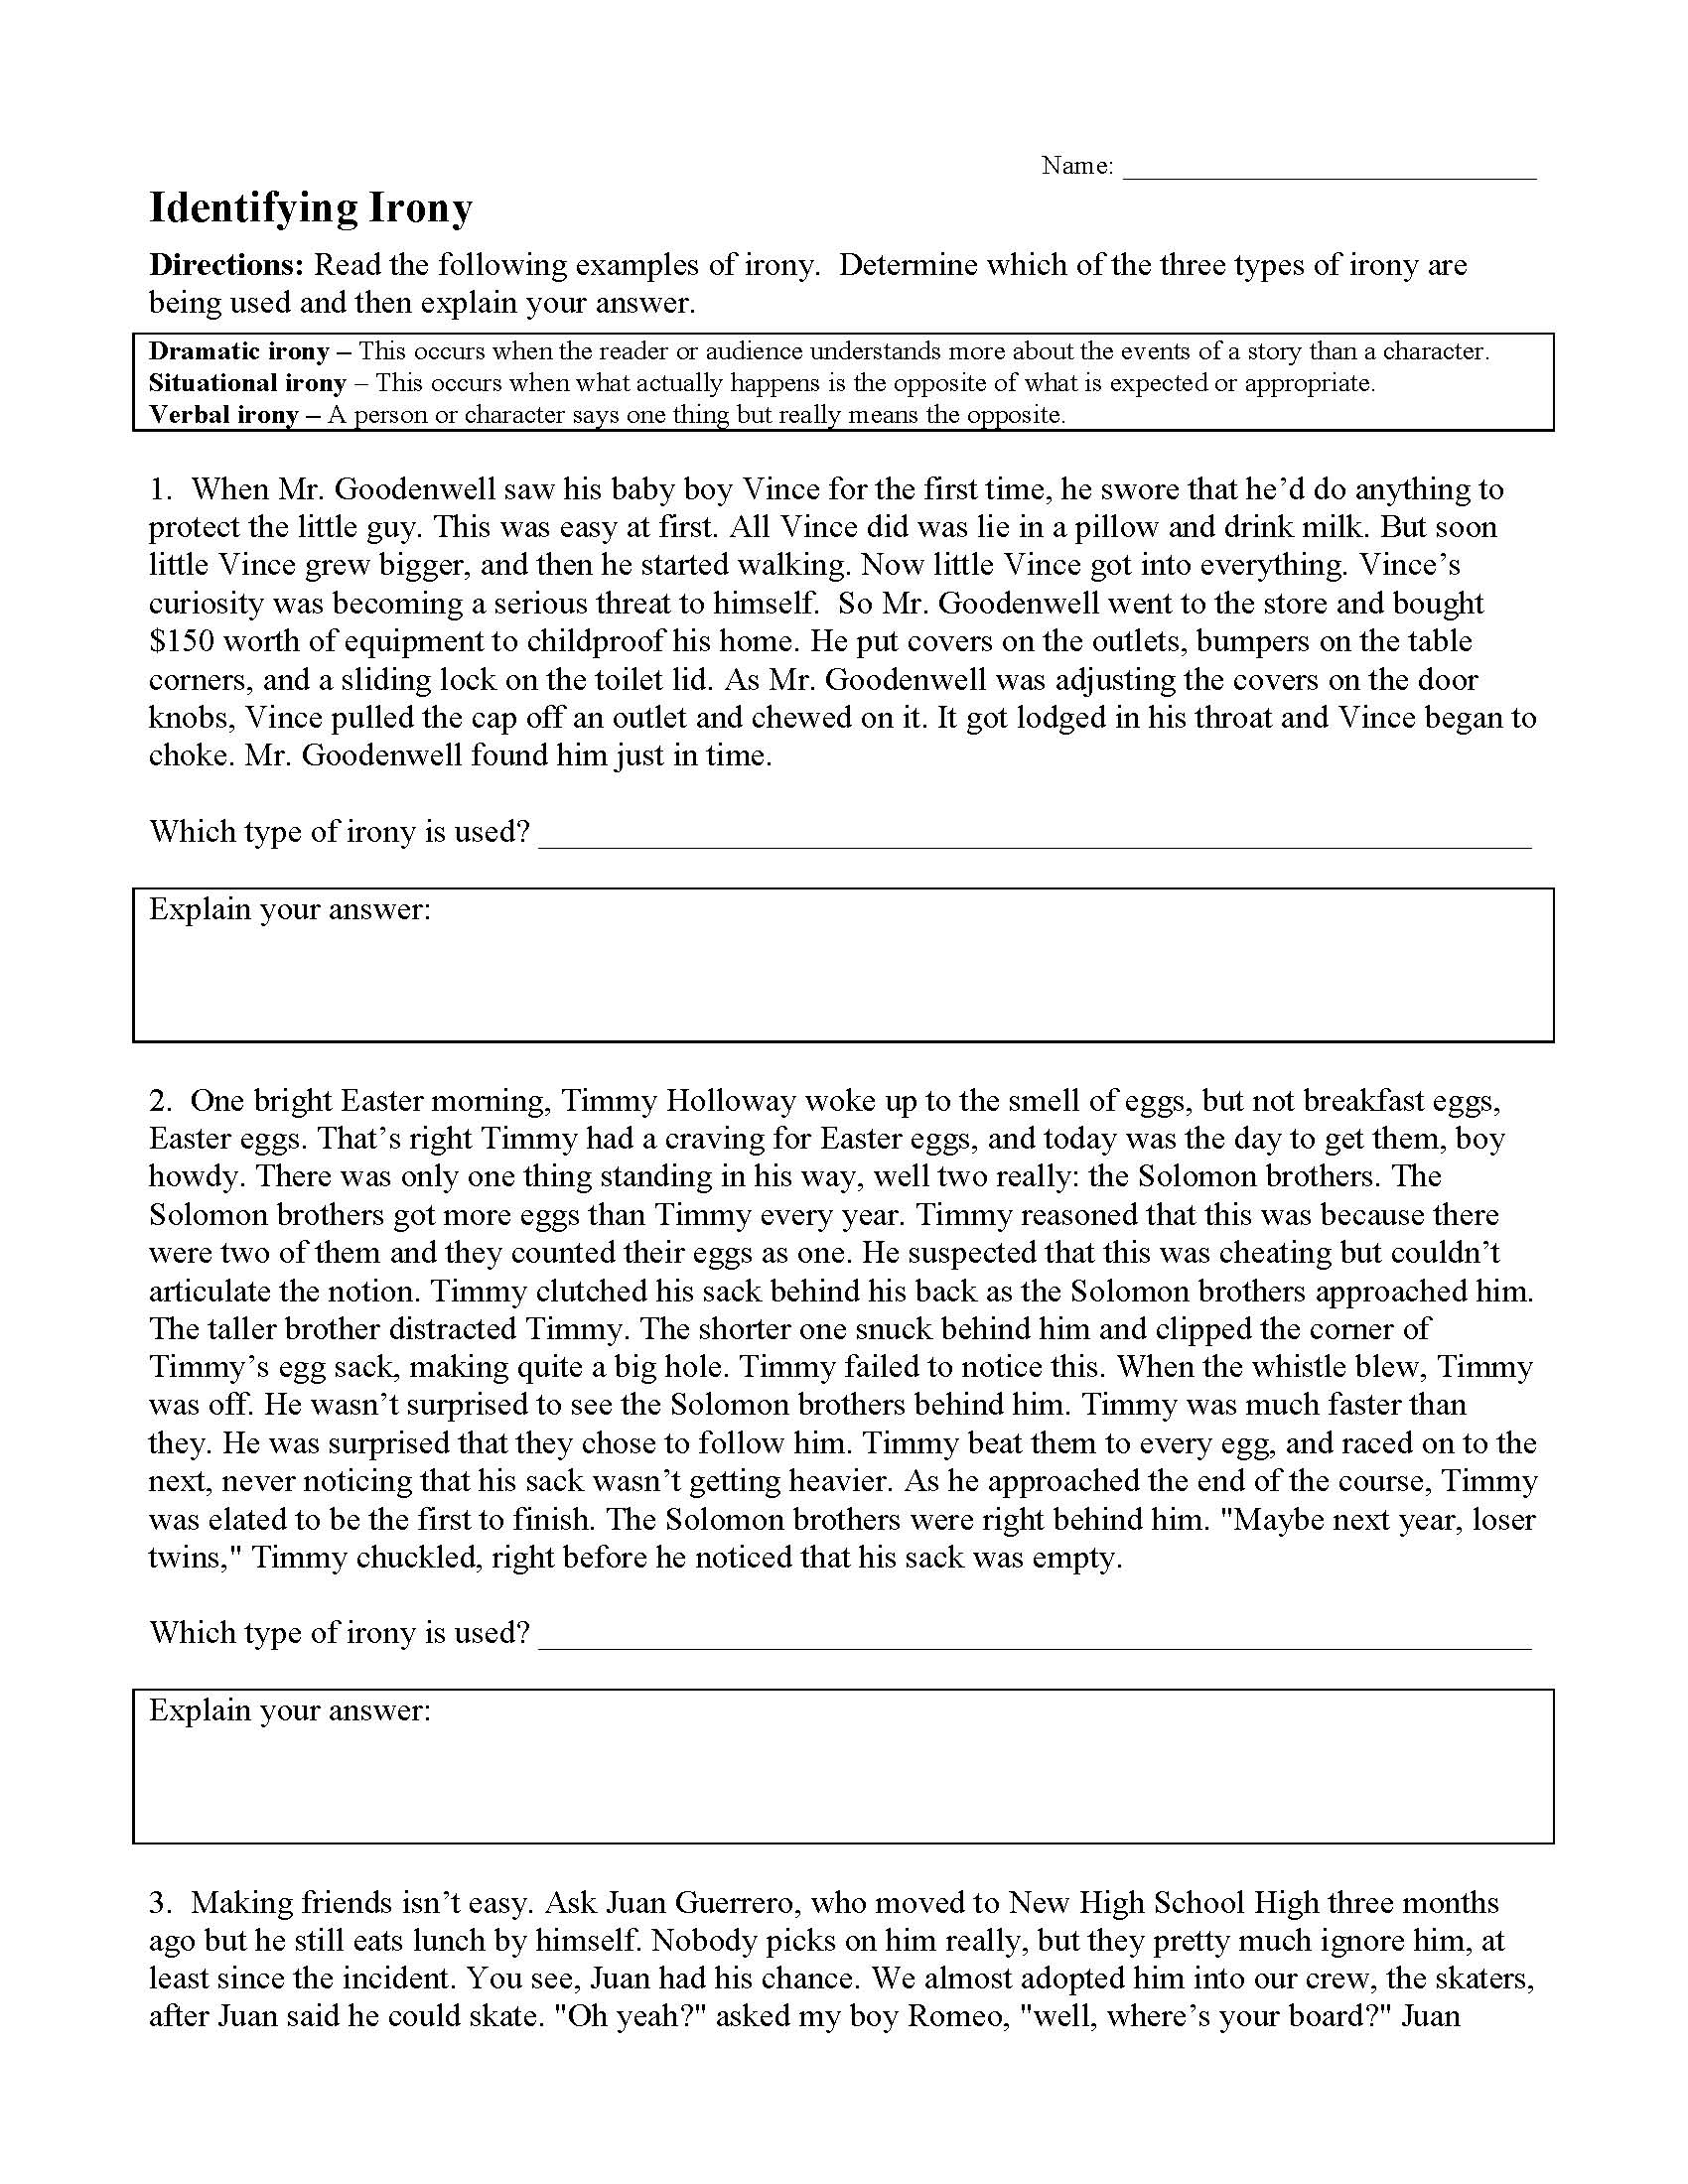 This is a preview image of Irony Worksheet 2. Click on it to enlarge it or view the source file.